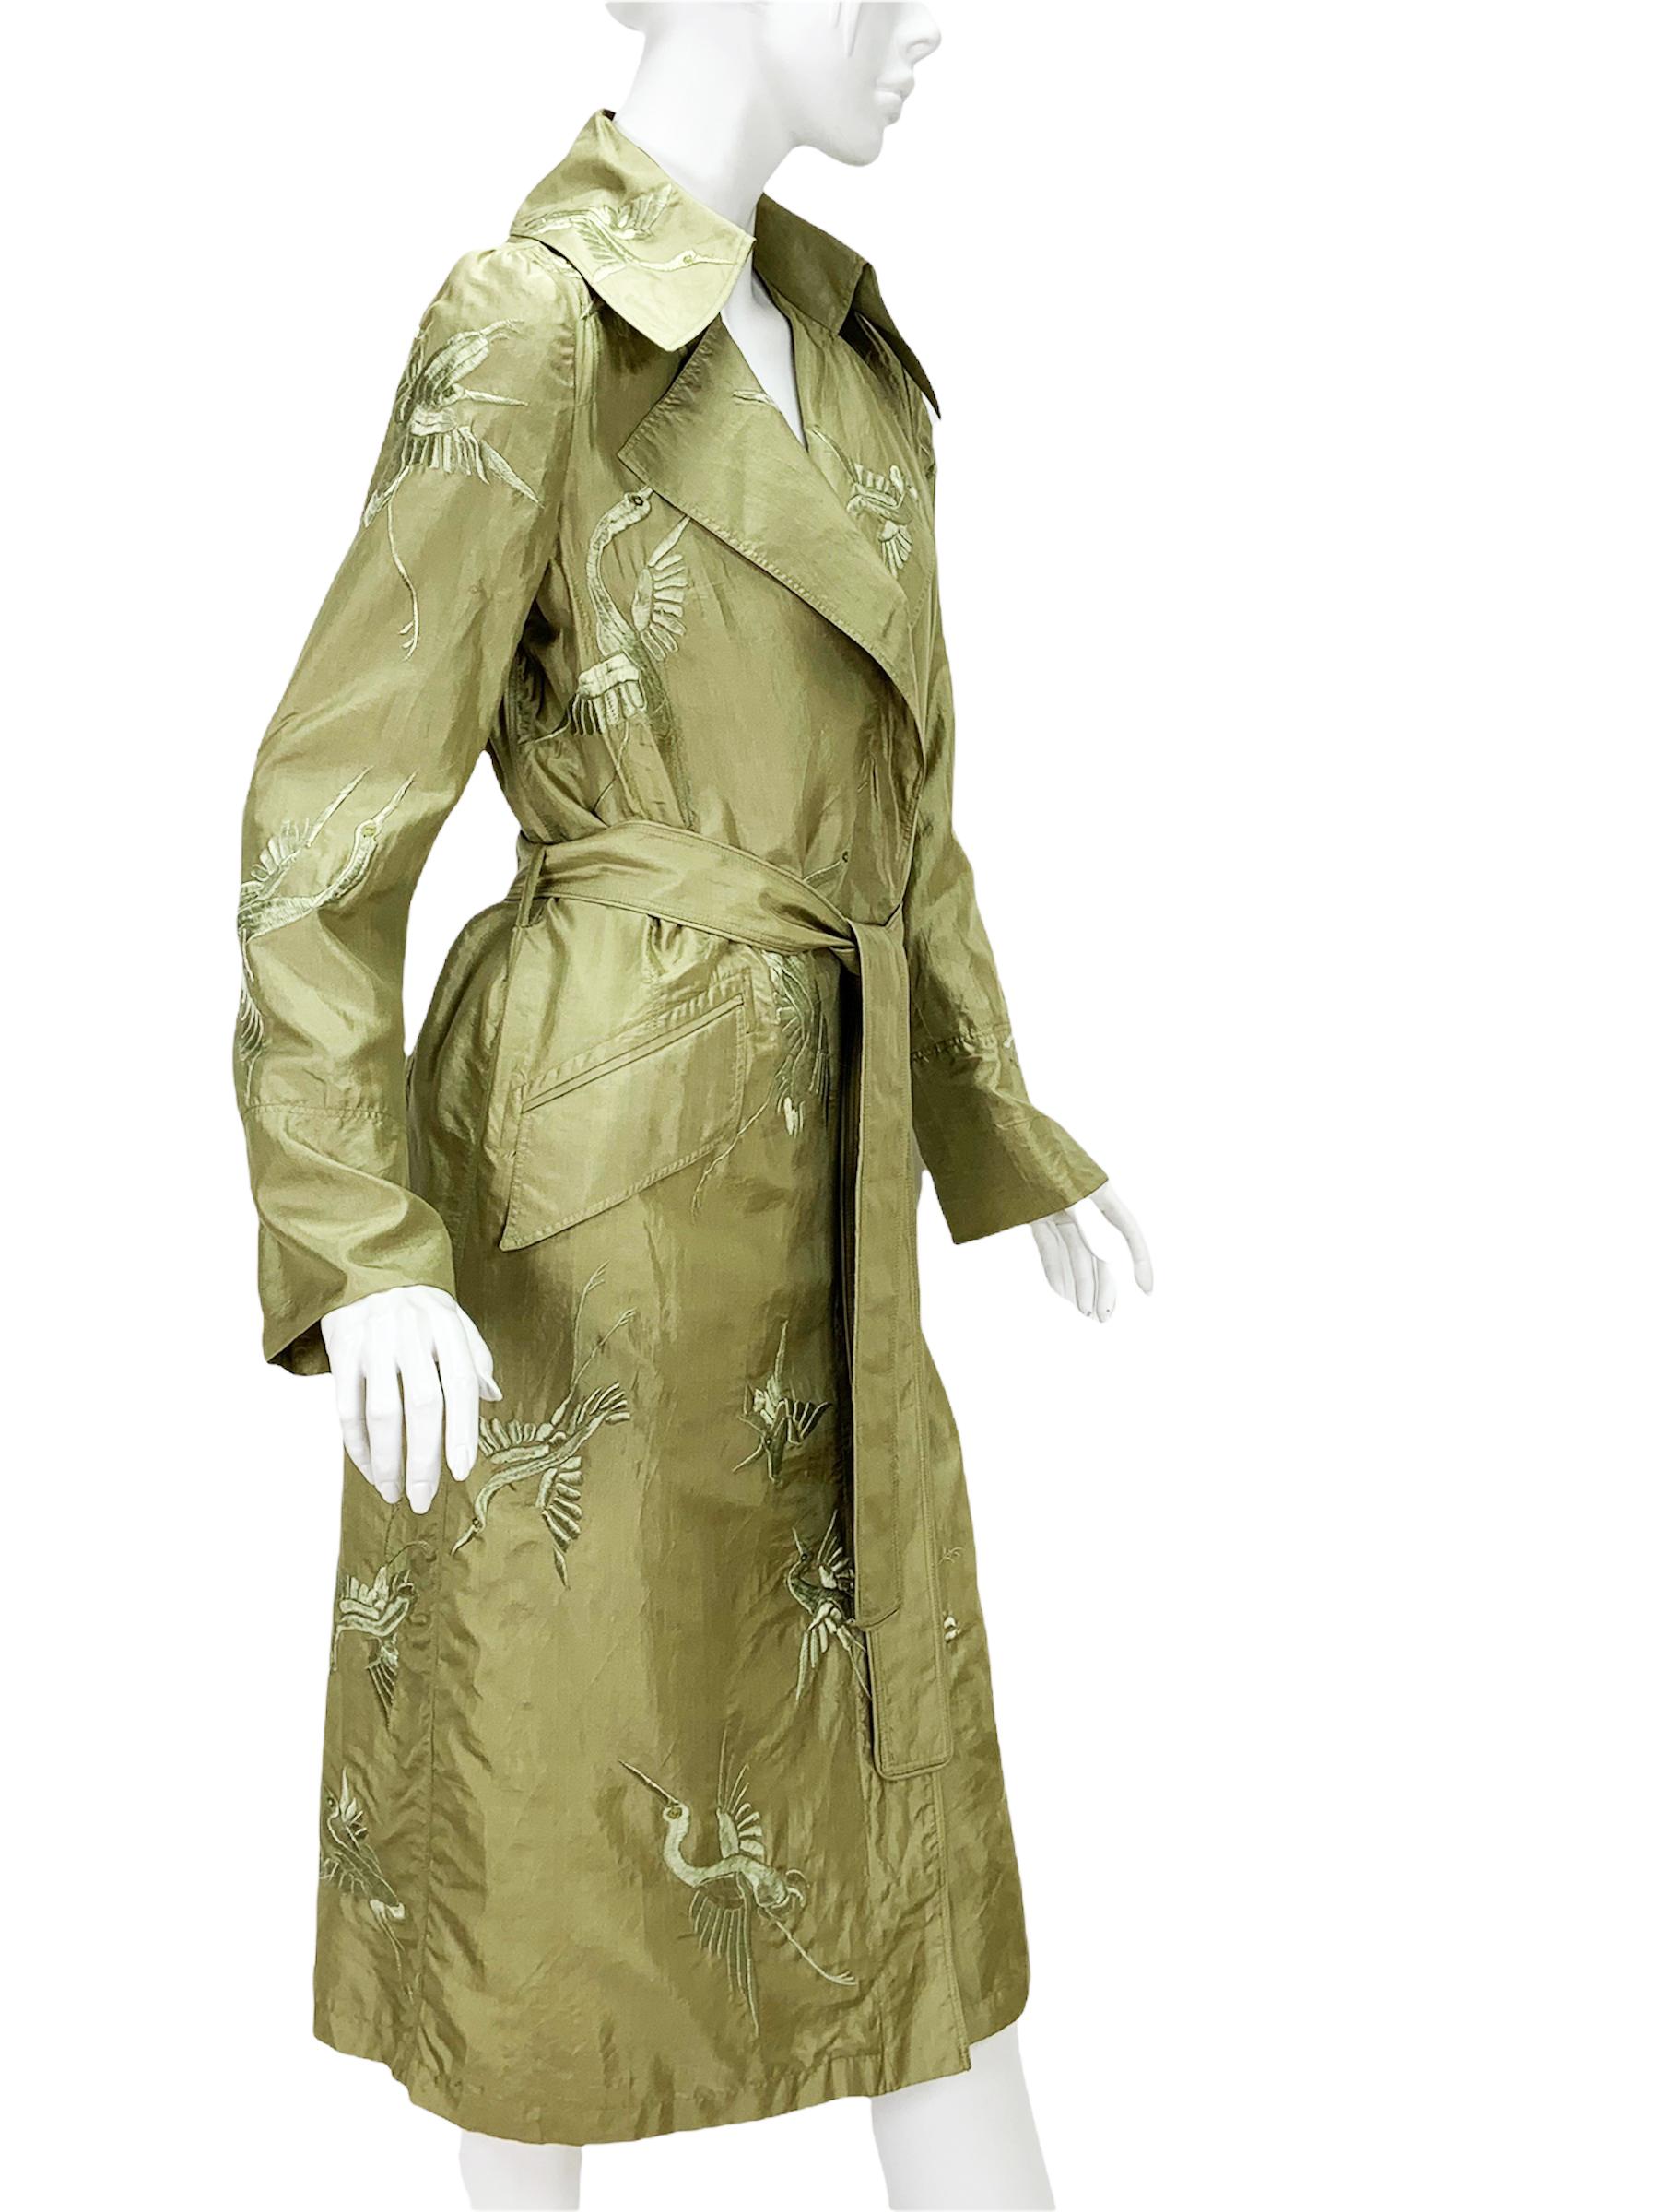 Tom Ford for Gucci Silk Green Embroidered Trench Coat
S/S 2002 Collection - Limited Edition !!!
Designer size - 38 (please check measurements - will fit bigger size also).
100% Silk, Sage Green Color,  Tone-to-Tone Silk Threads Crane Bird